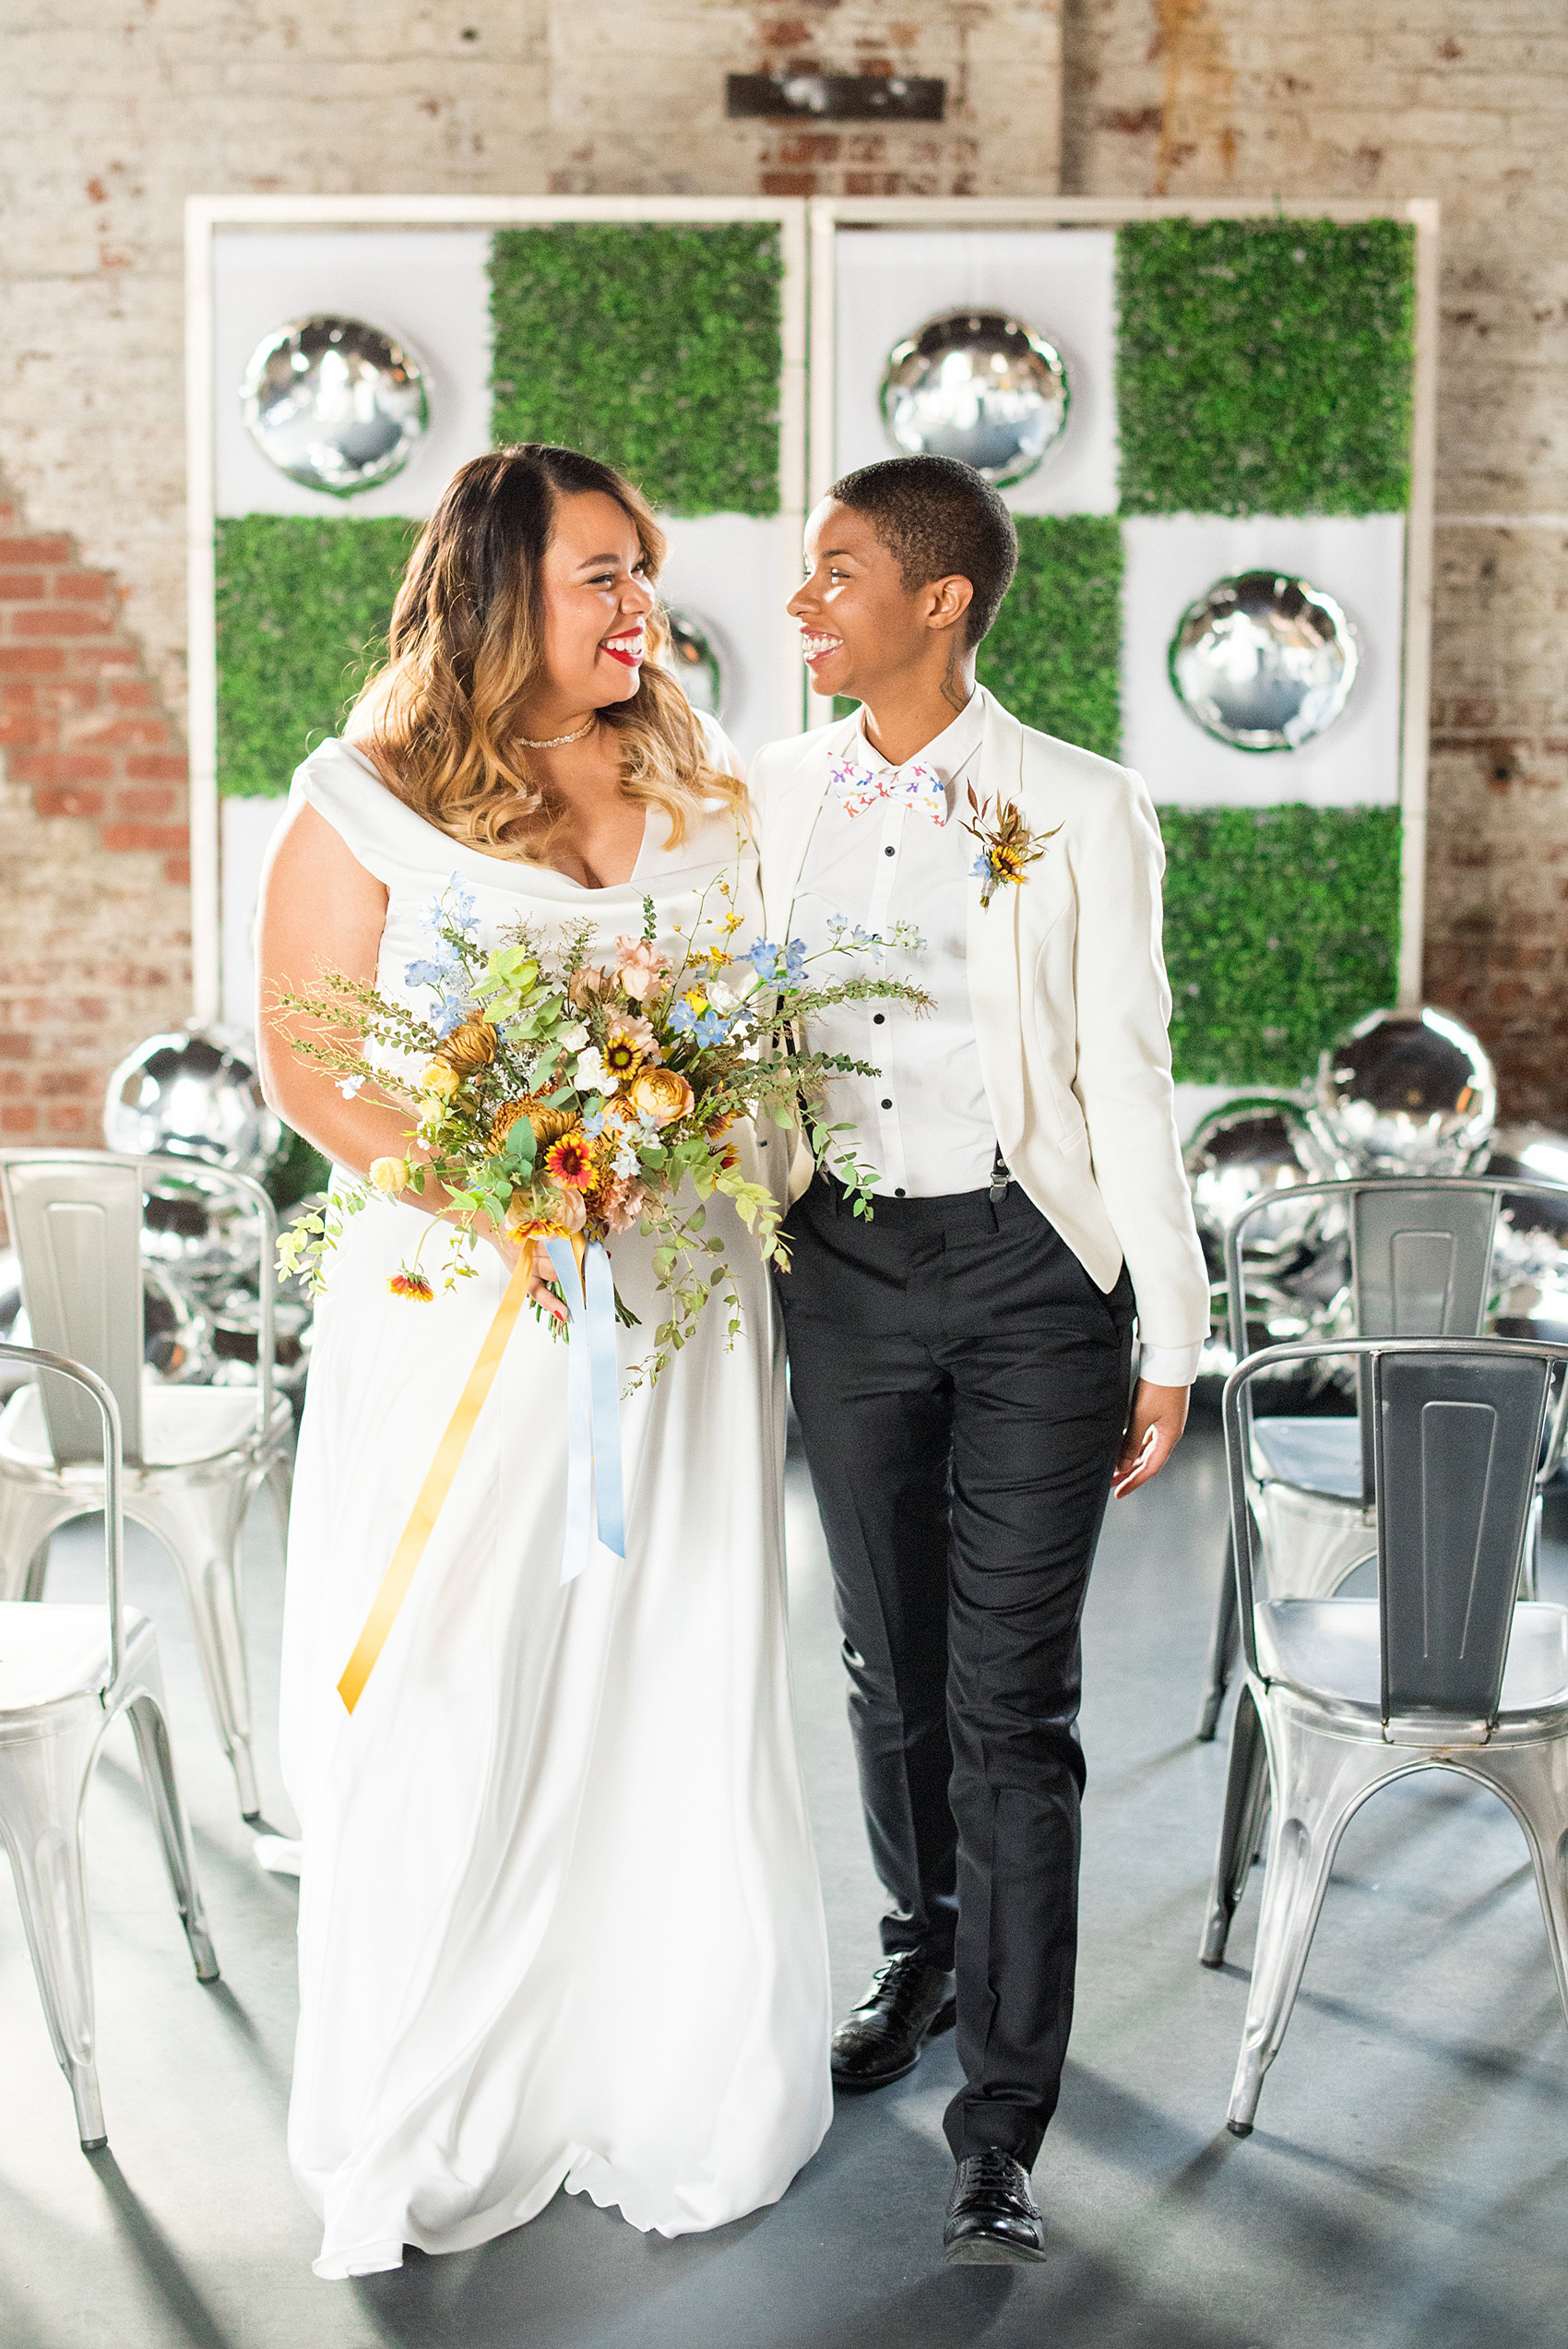 Mikkel Paige Photography photos of a wedding at the Green Building in Brooklyn, New York. This same sex, gay marriage styled shoot was created by Color Pop Events. They recited vows during their ceremony in front of silver mylar balloons and green square boxwood patches. The bride wore a white, silk cowl neck gown and the bride groom in a white coat with colorful bow tie.